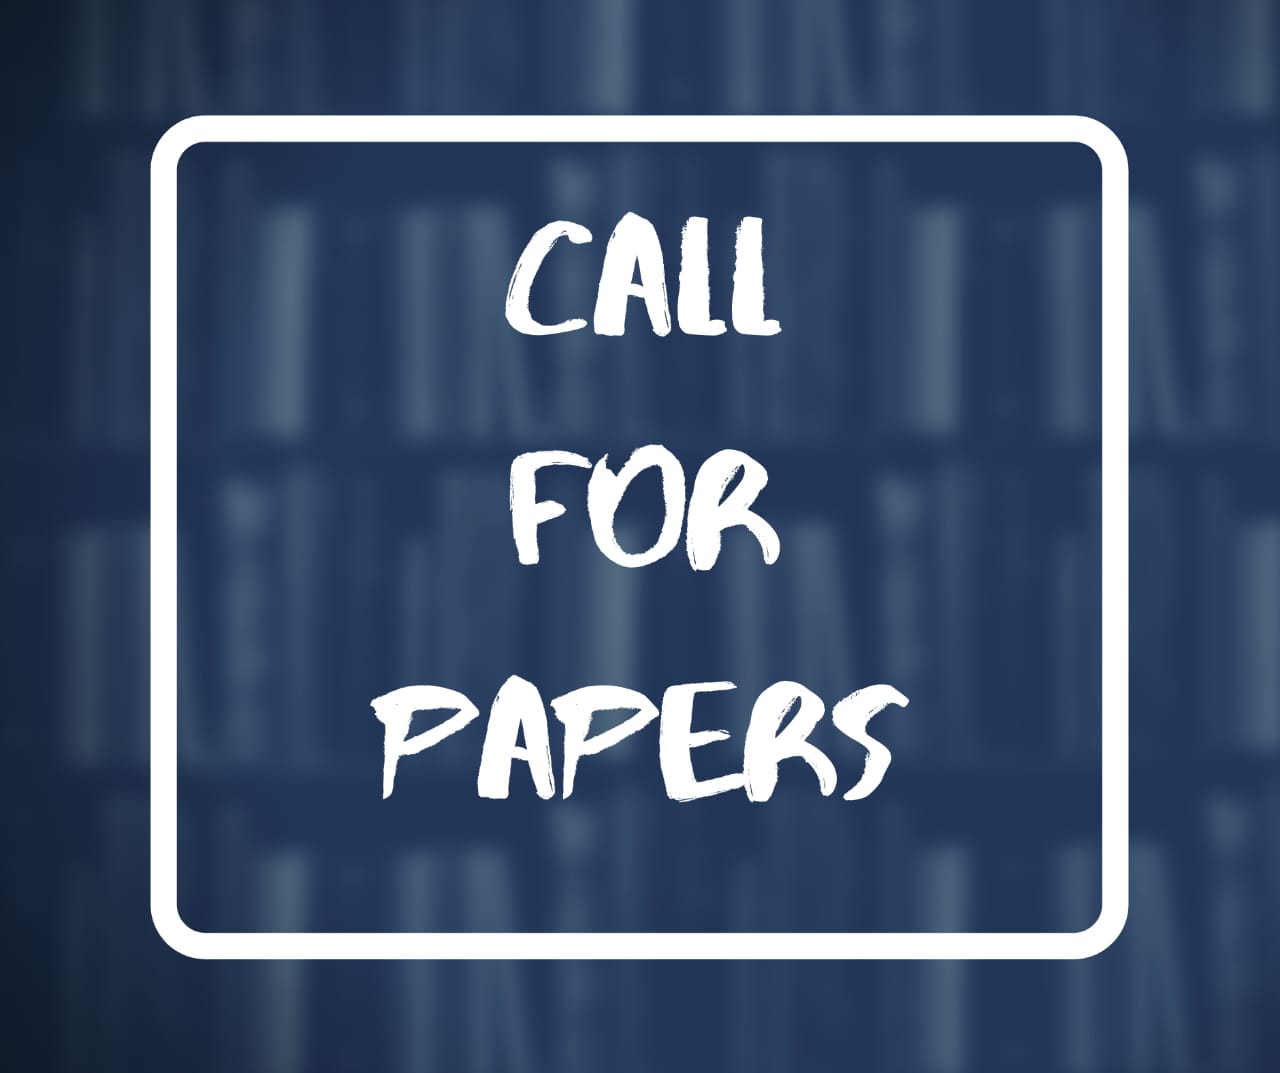 The International Review Of Intellectual Property And Competition Law (IIC) Invites Research Papers For Their Peer-Reviewed Academic Journal: Submit Now!